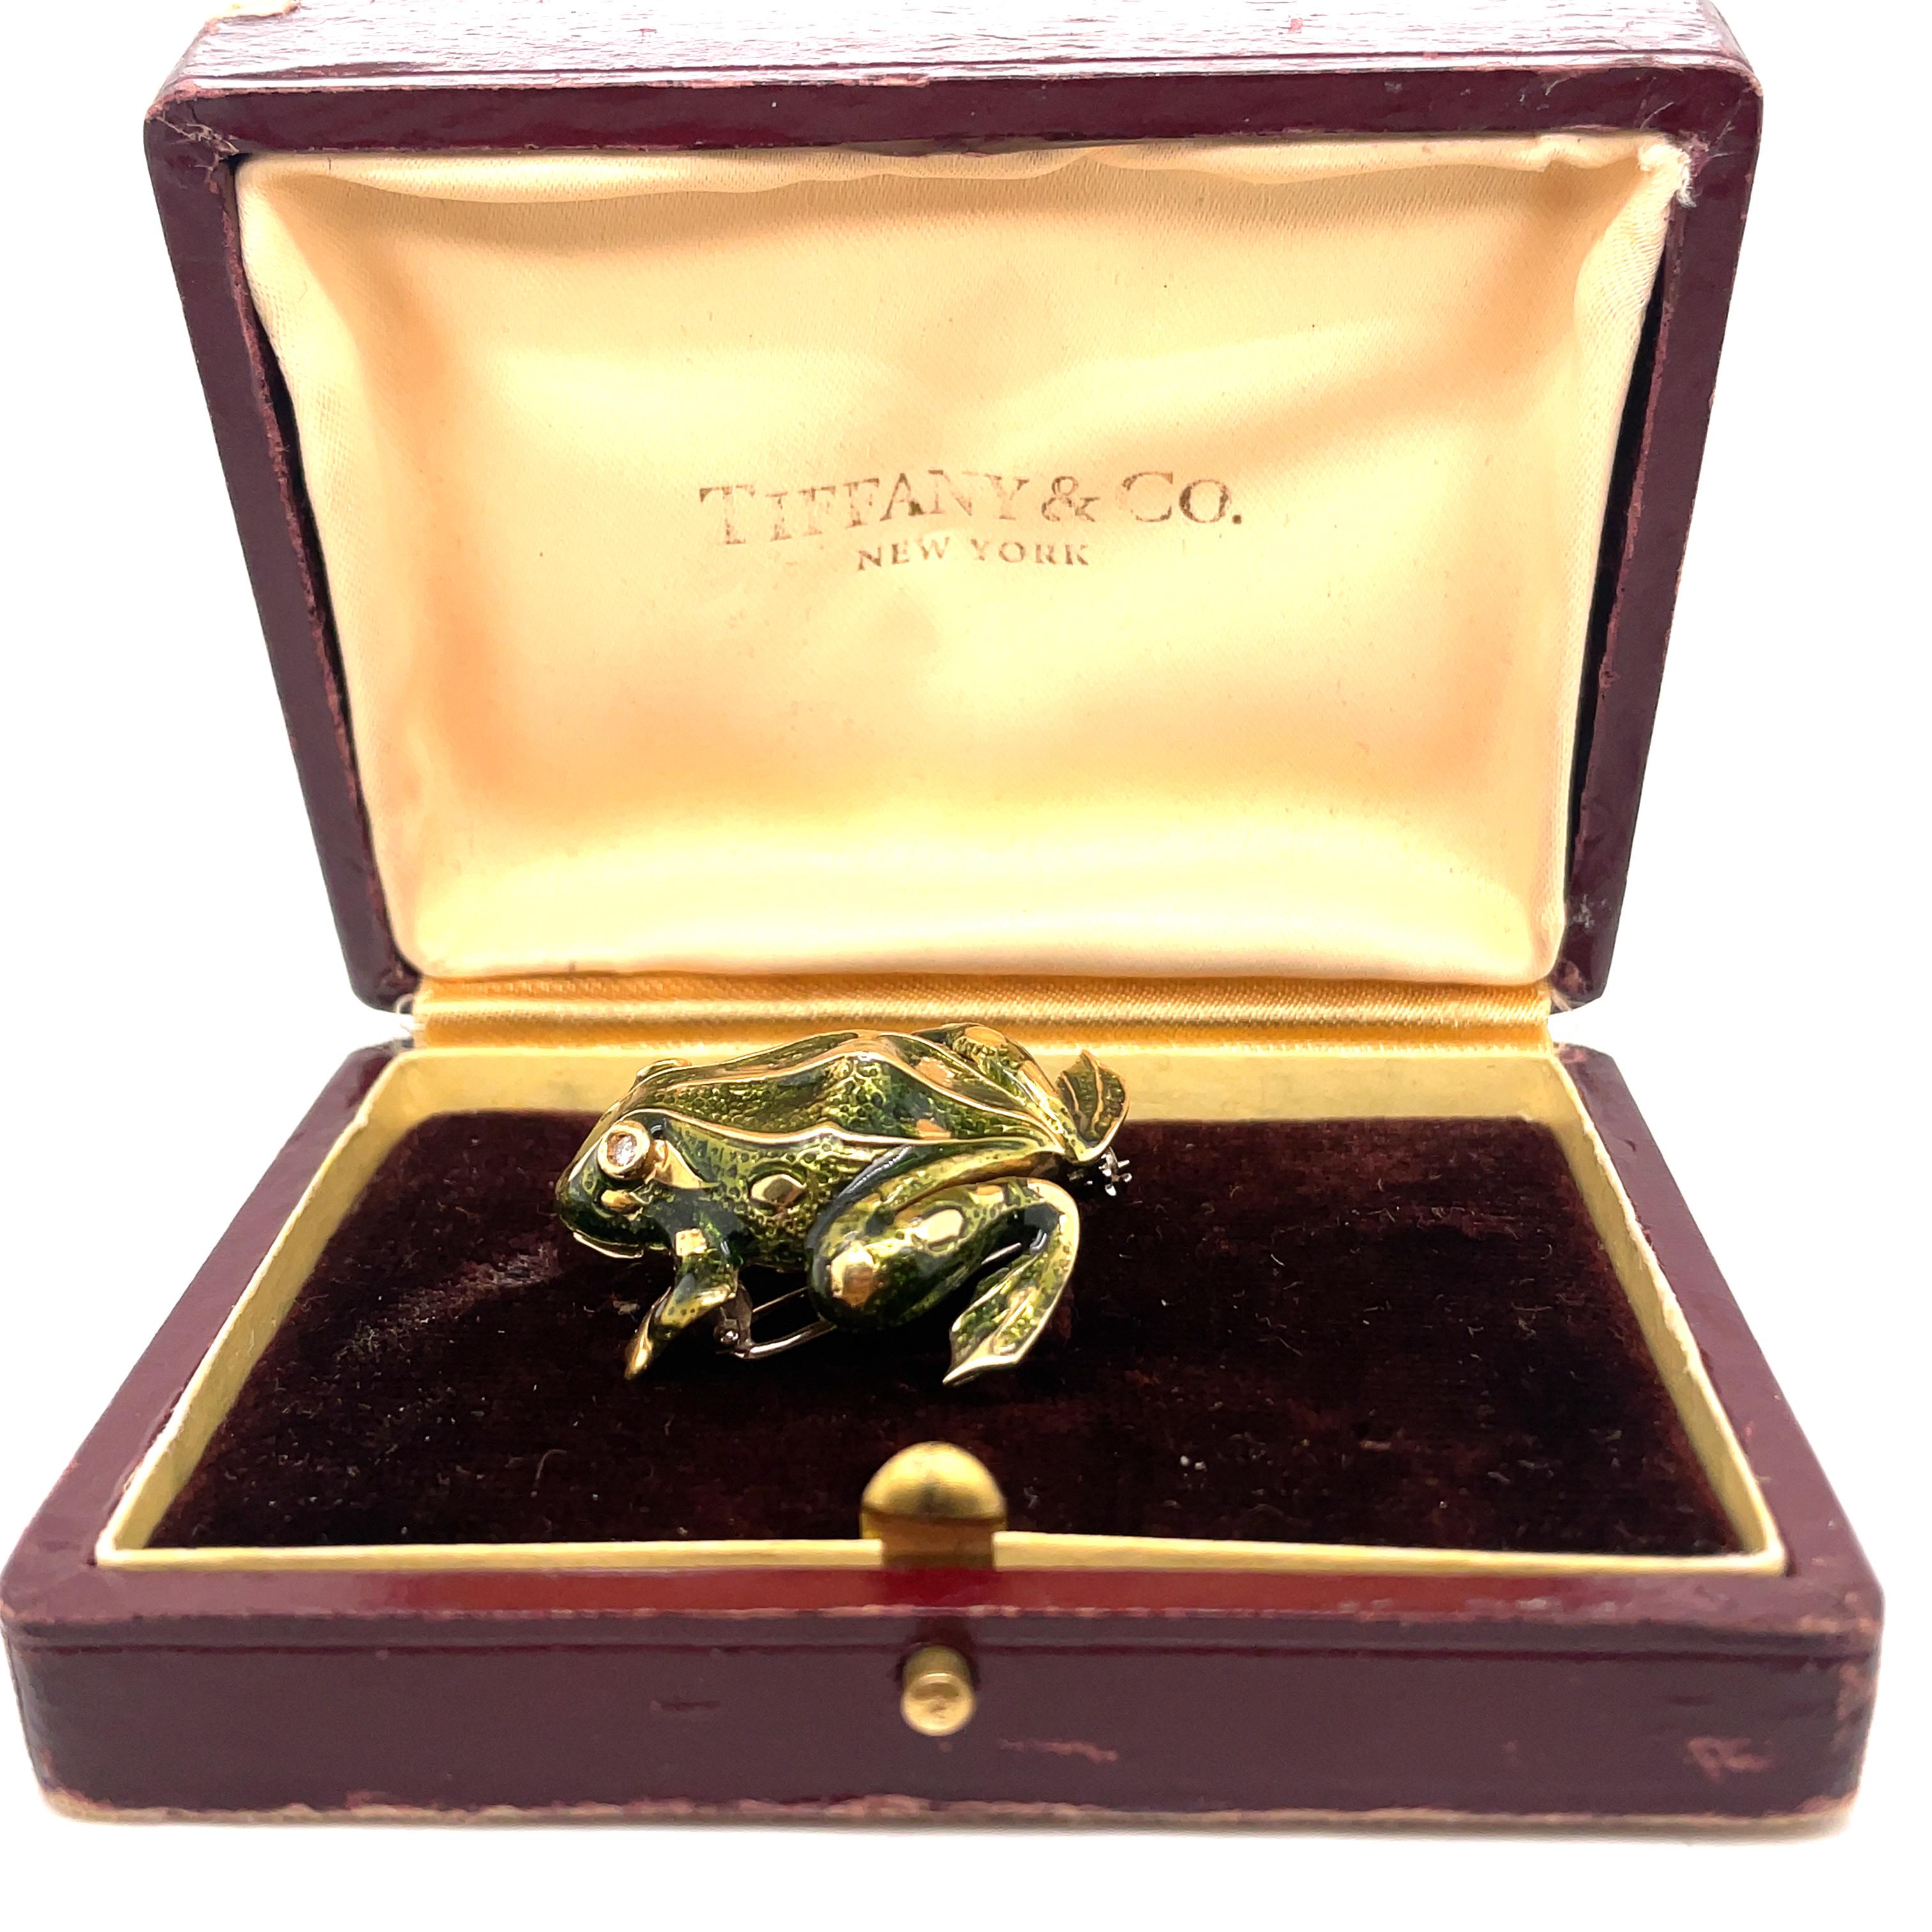 An iconic Tiffany & Co. Enamel and Diamond Frog Pendant/Brooch, made in Italy circa 1970'
Hallmarks: Tiffany & Co, 750
Gross weight: 15,8 gr

Excellent condition, comes with original box, 100% authenticity guarantee, Free appraisal card with purchase